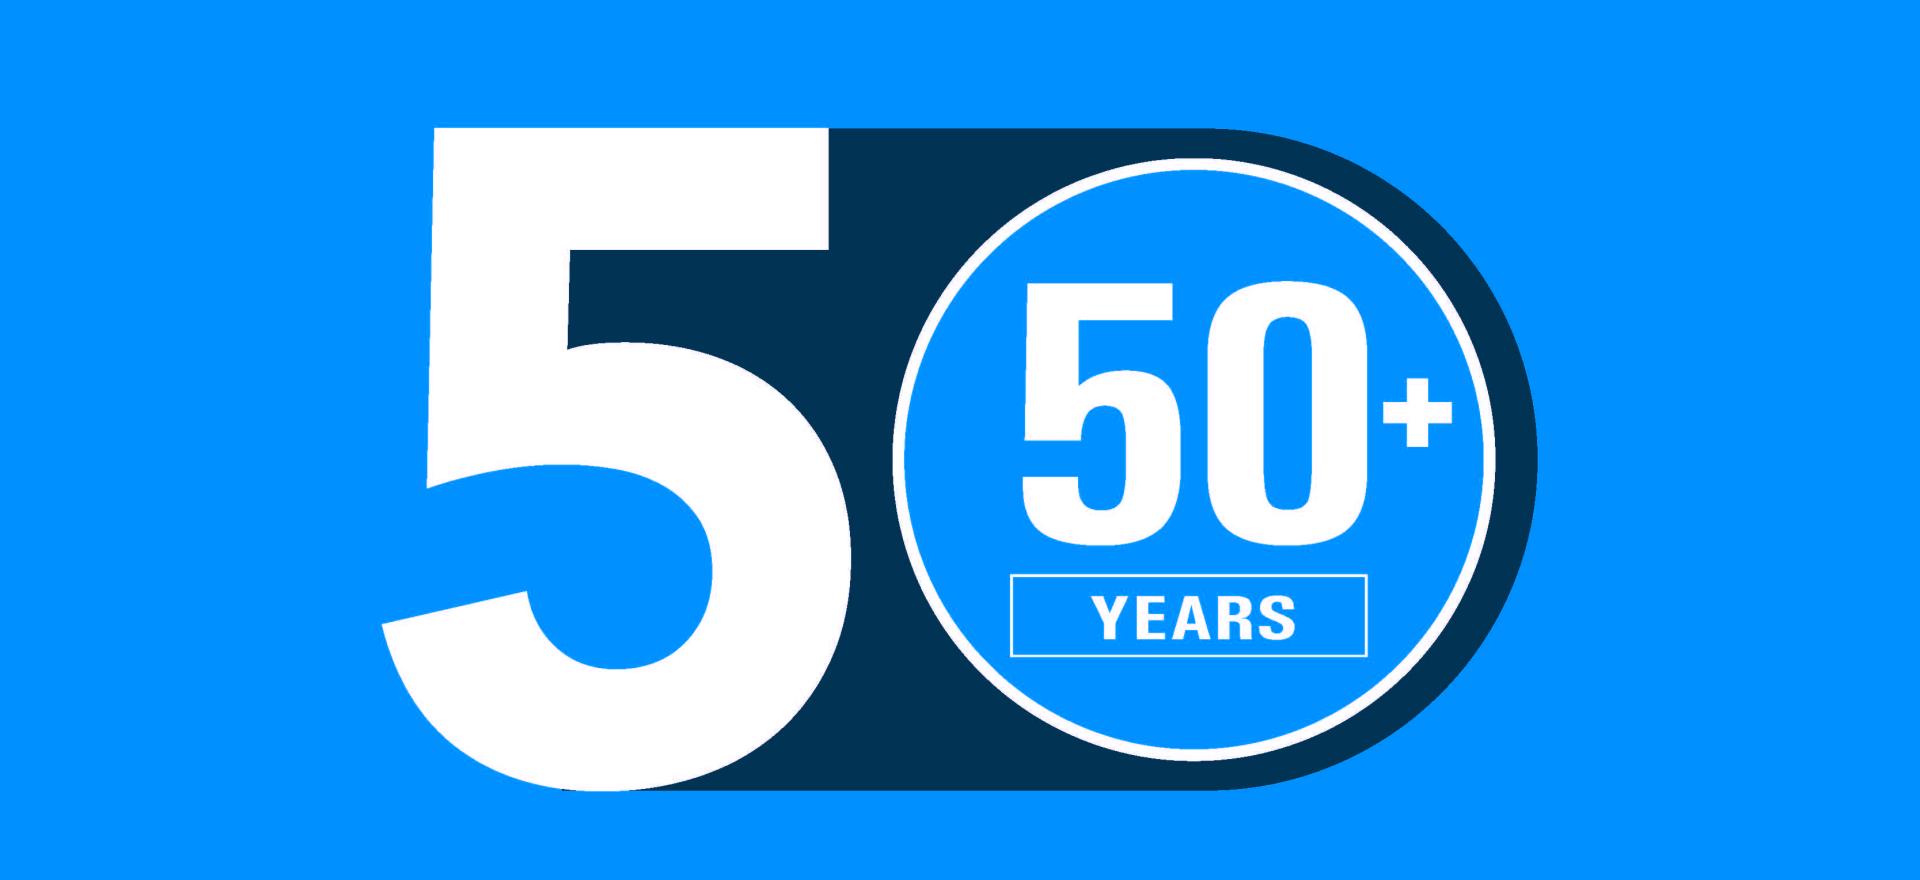 Jayco: Over 50 Years of Proven Experience